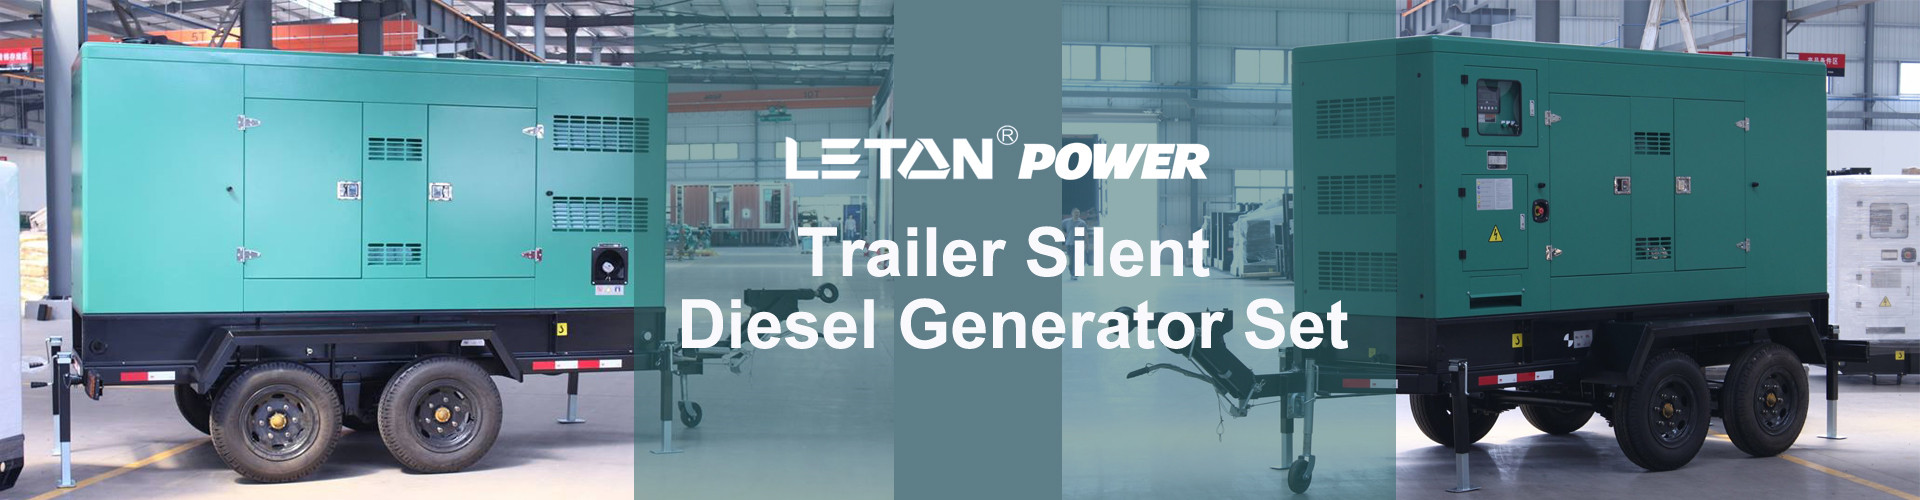 Trailer silent diesel generator towable standby power plant